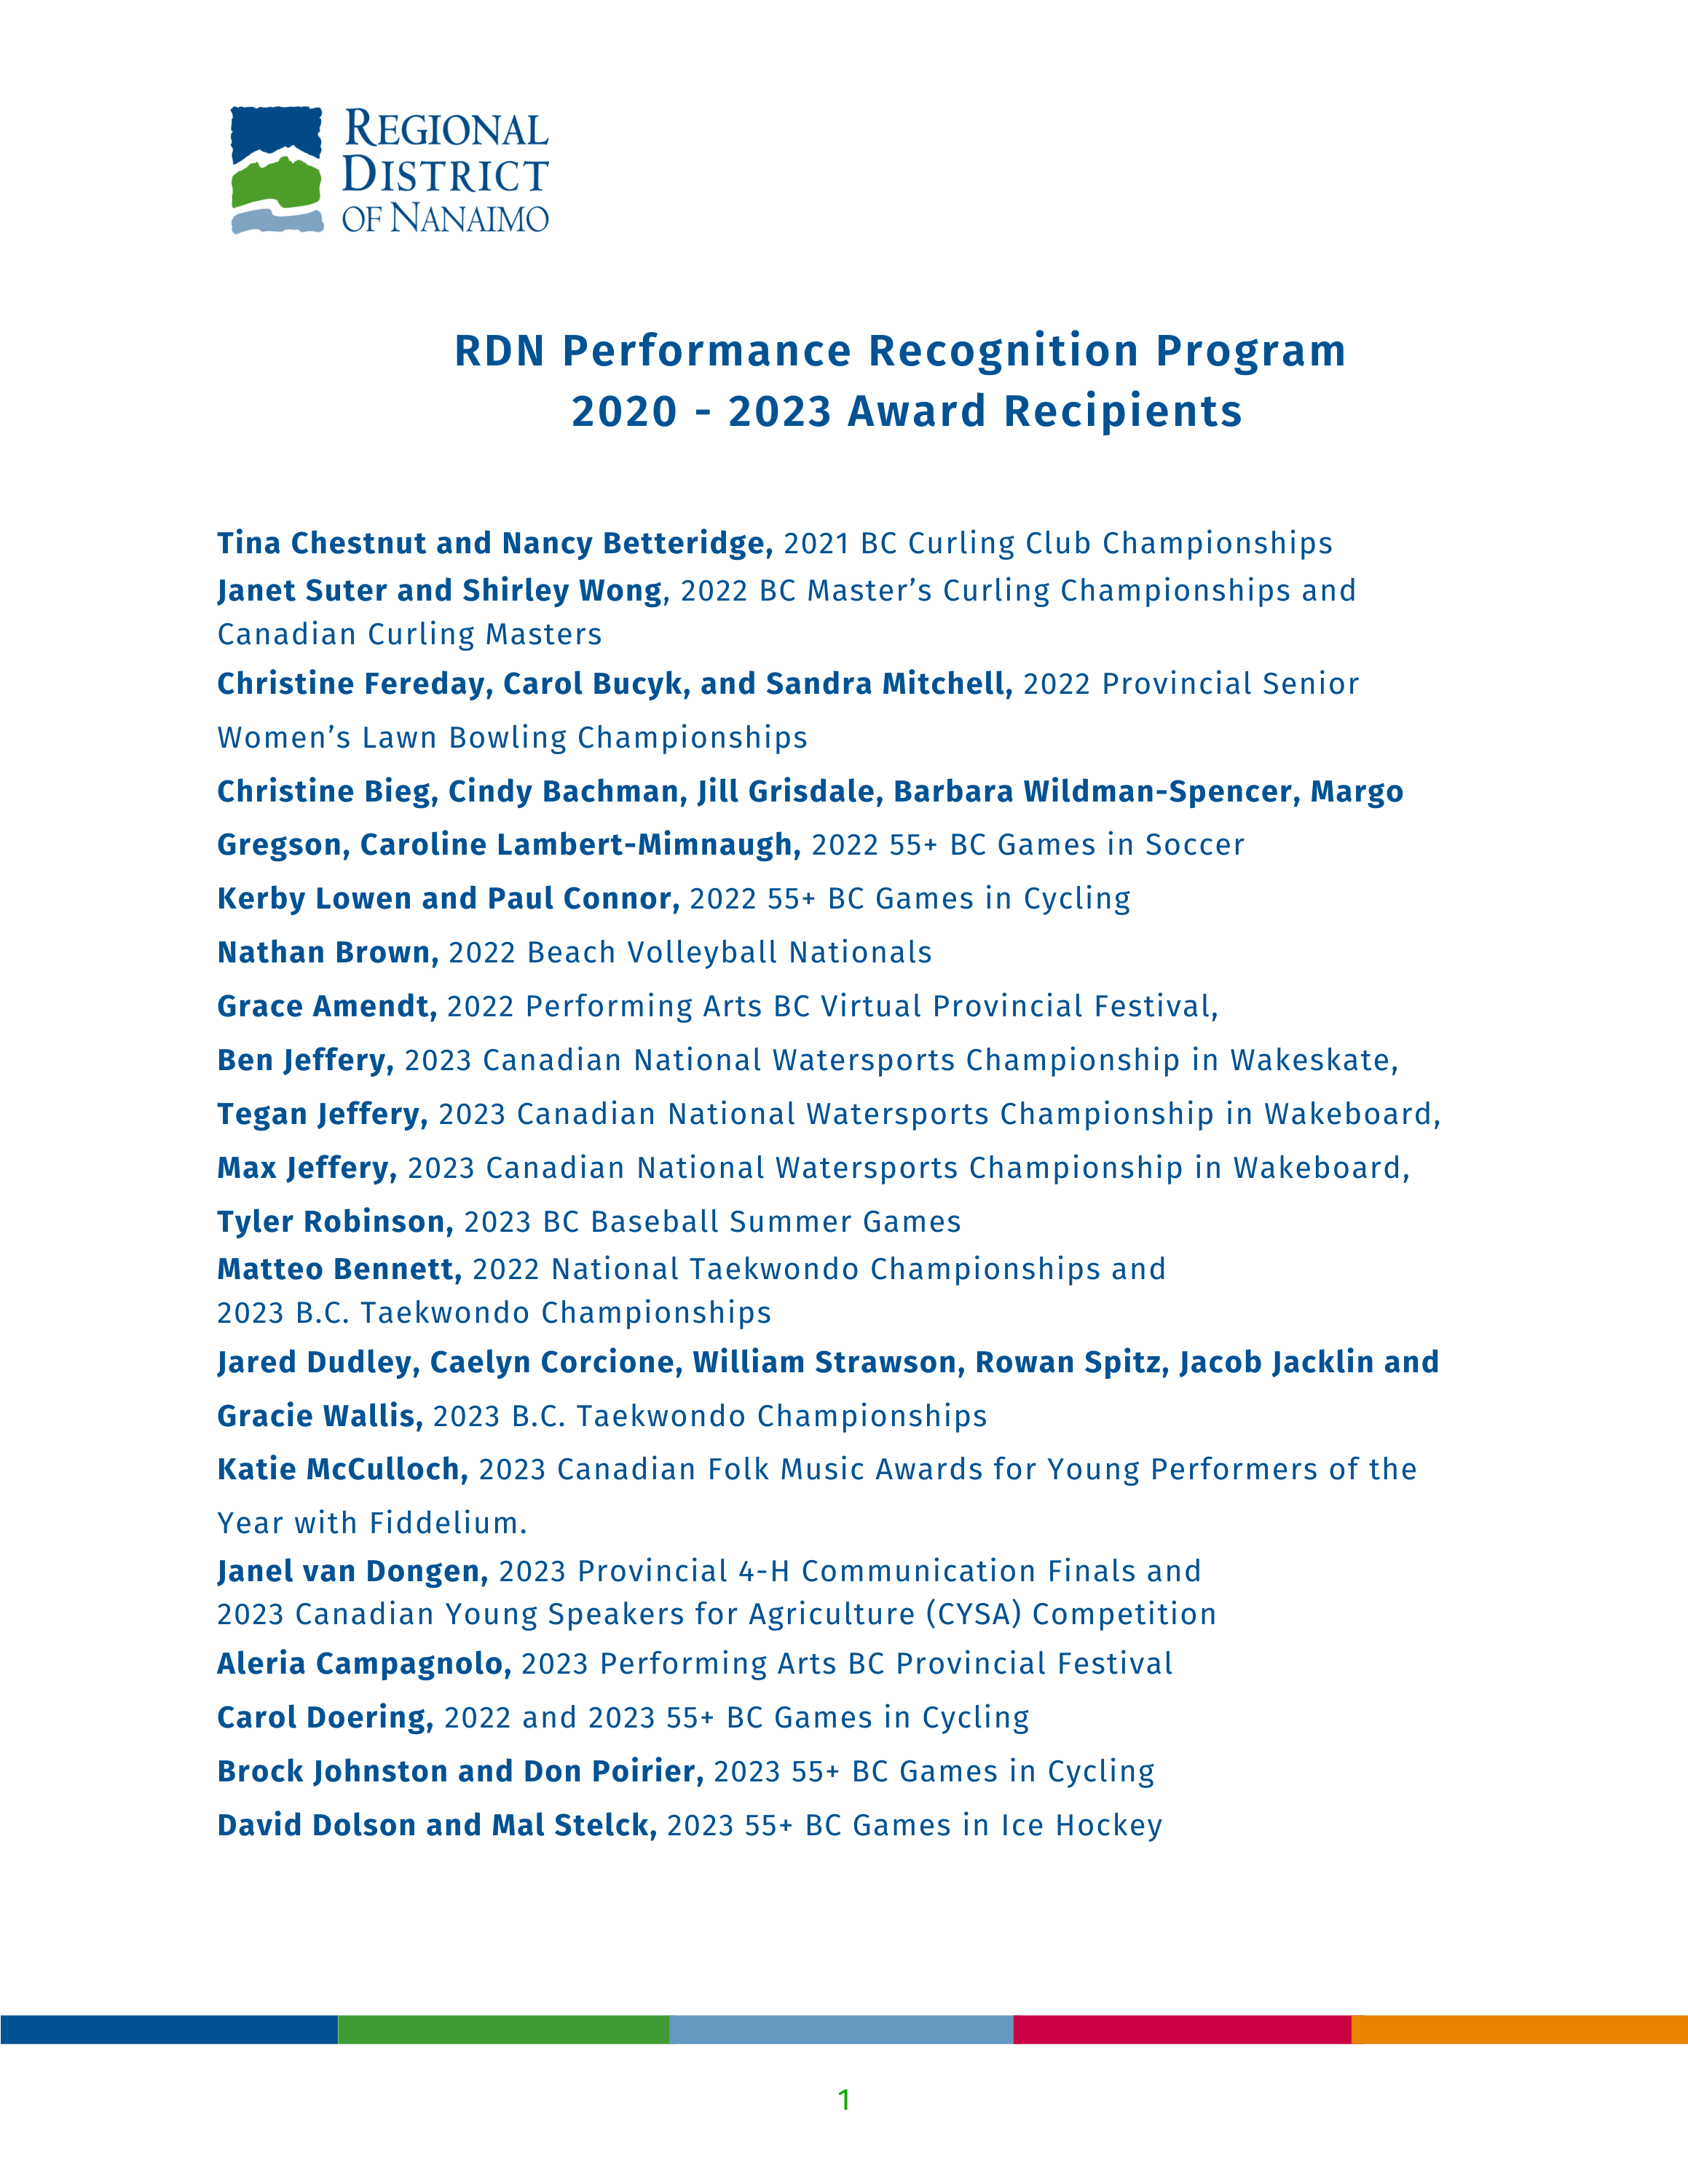 Performance Award Recipients page 1